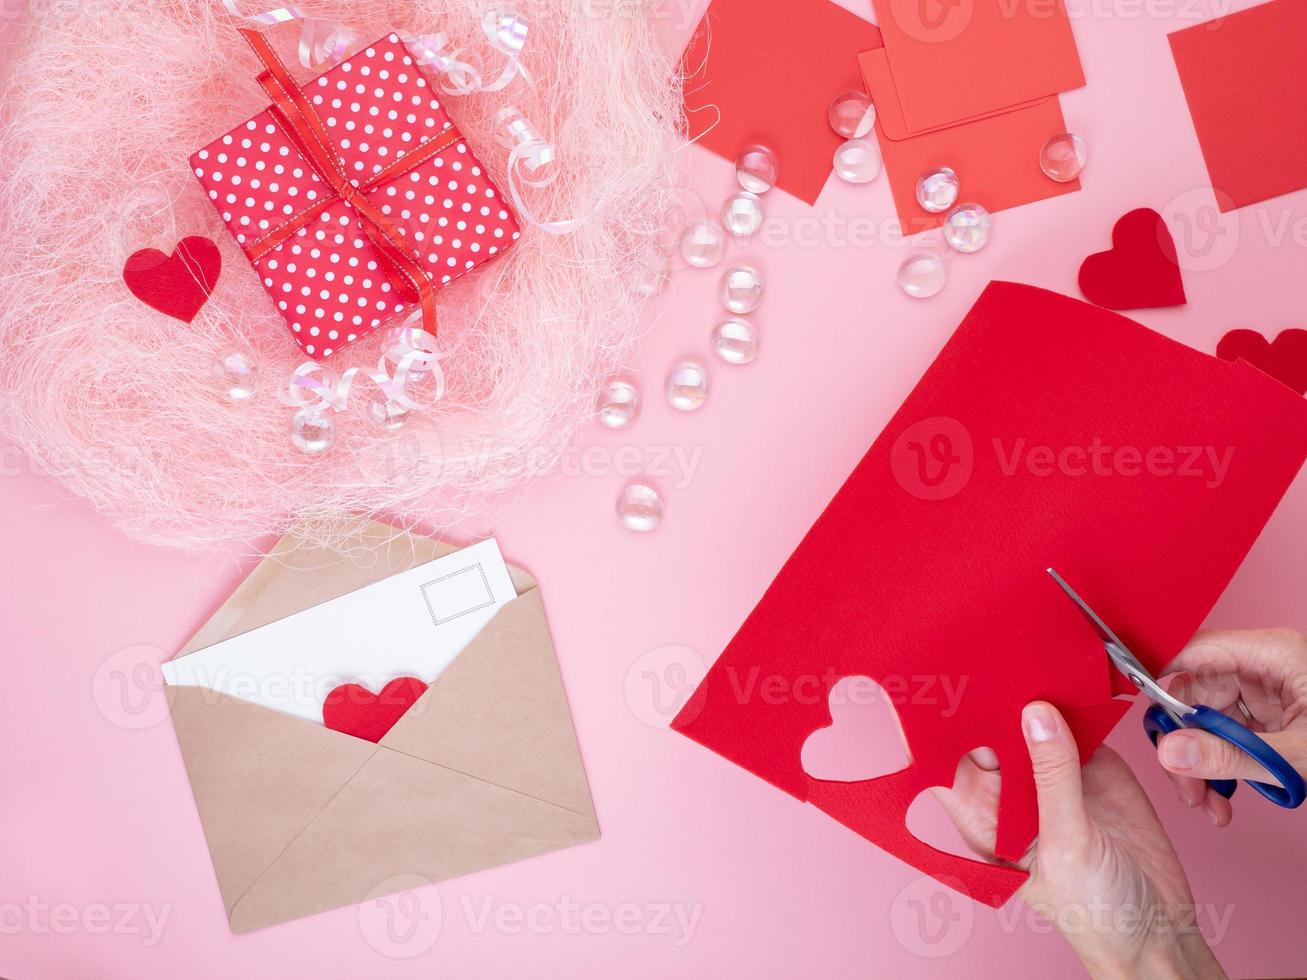 woman cuts out red felt hearts, homemade crafts for Valentine's day, hand made creativity, top view photo